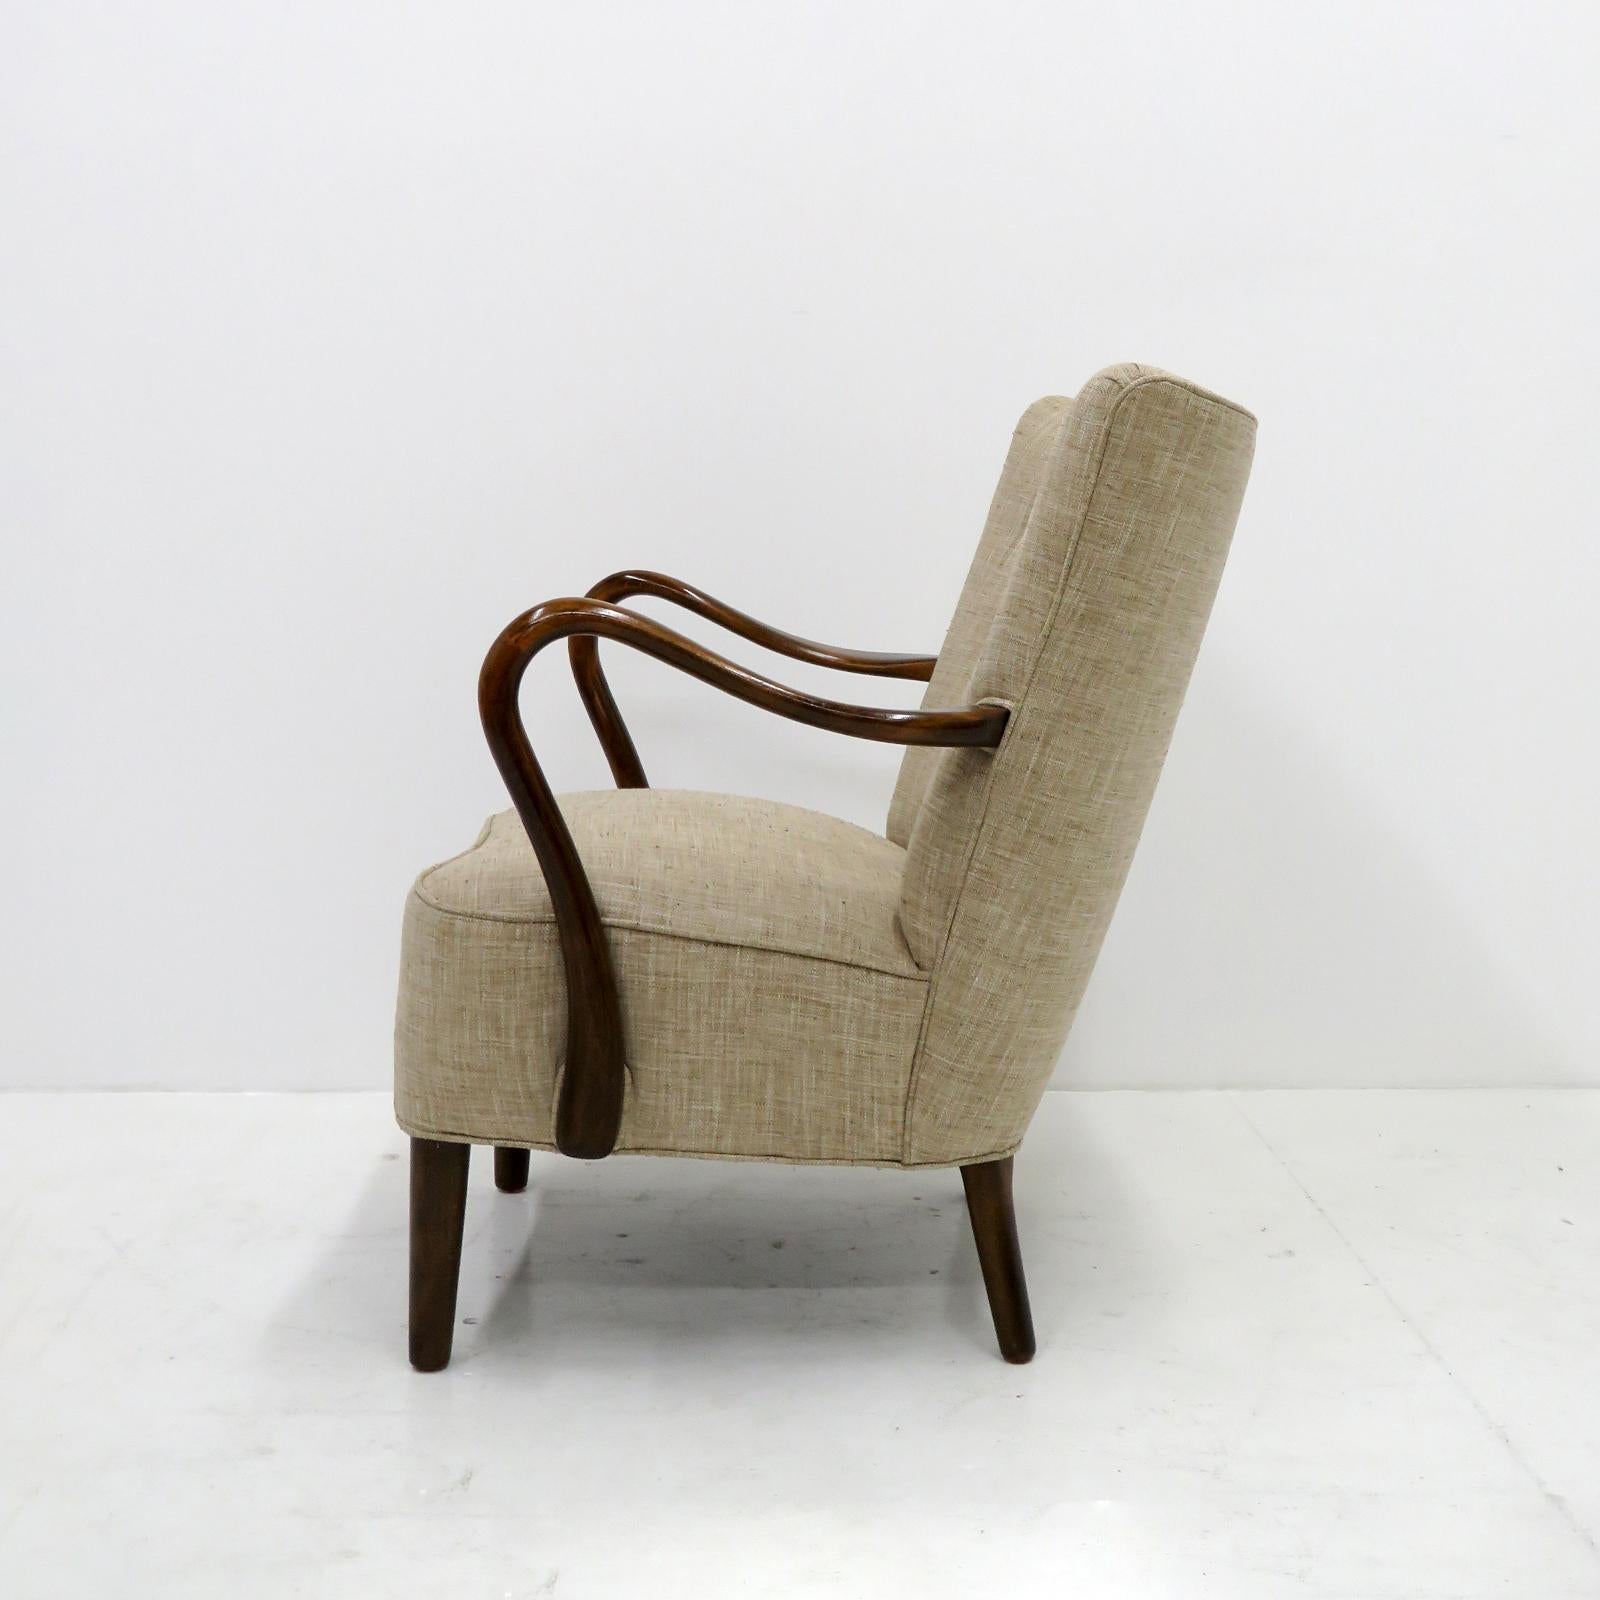 Stained Alfred Christensen Lounge Chair, 1950 For Sale